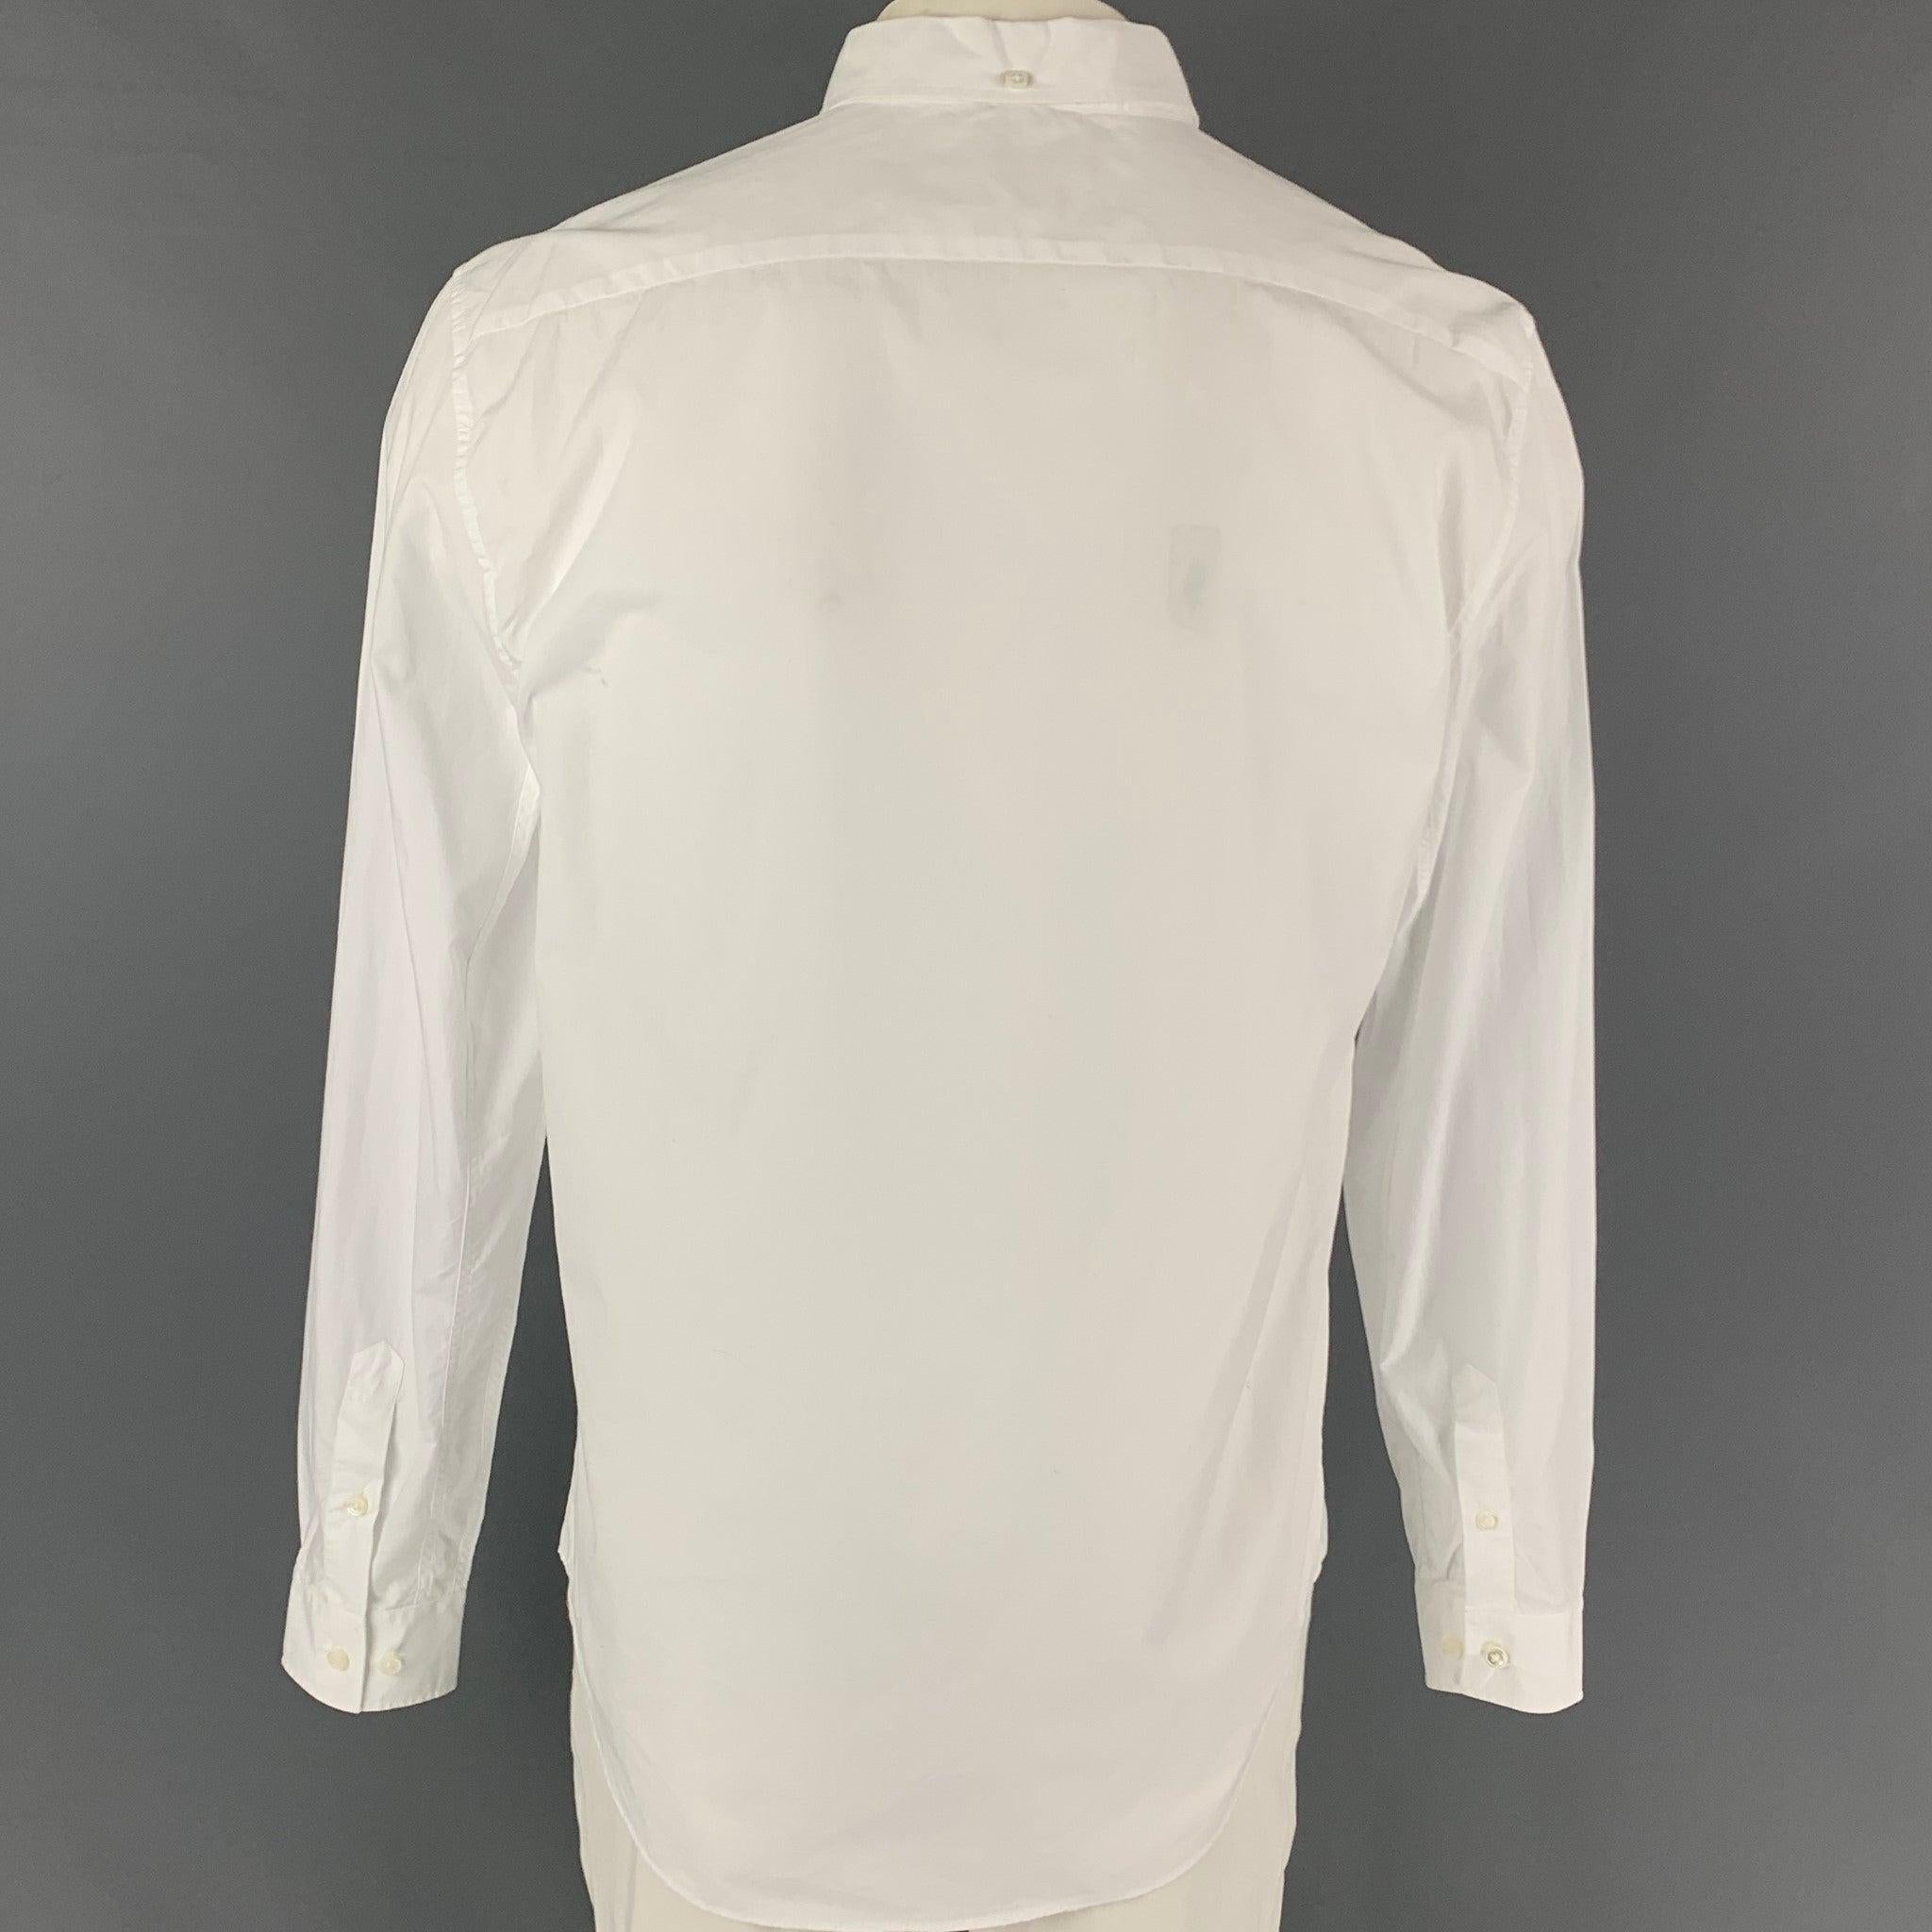 MARC JACOBS Size XL White Cotton Button Down Long Sleeve Shirt In Good Condition For Sale In San Francisco, CA